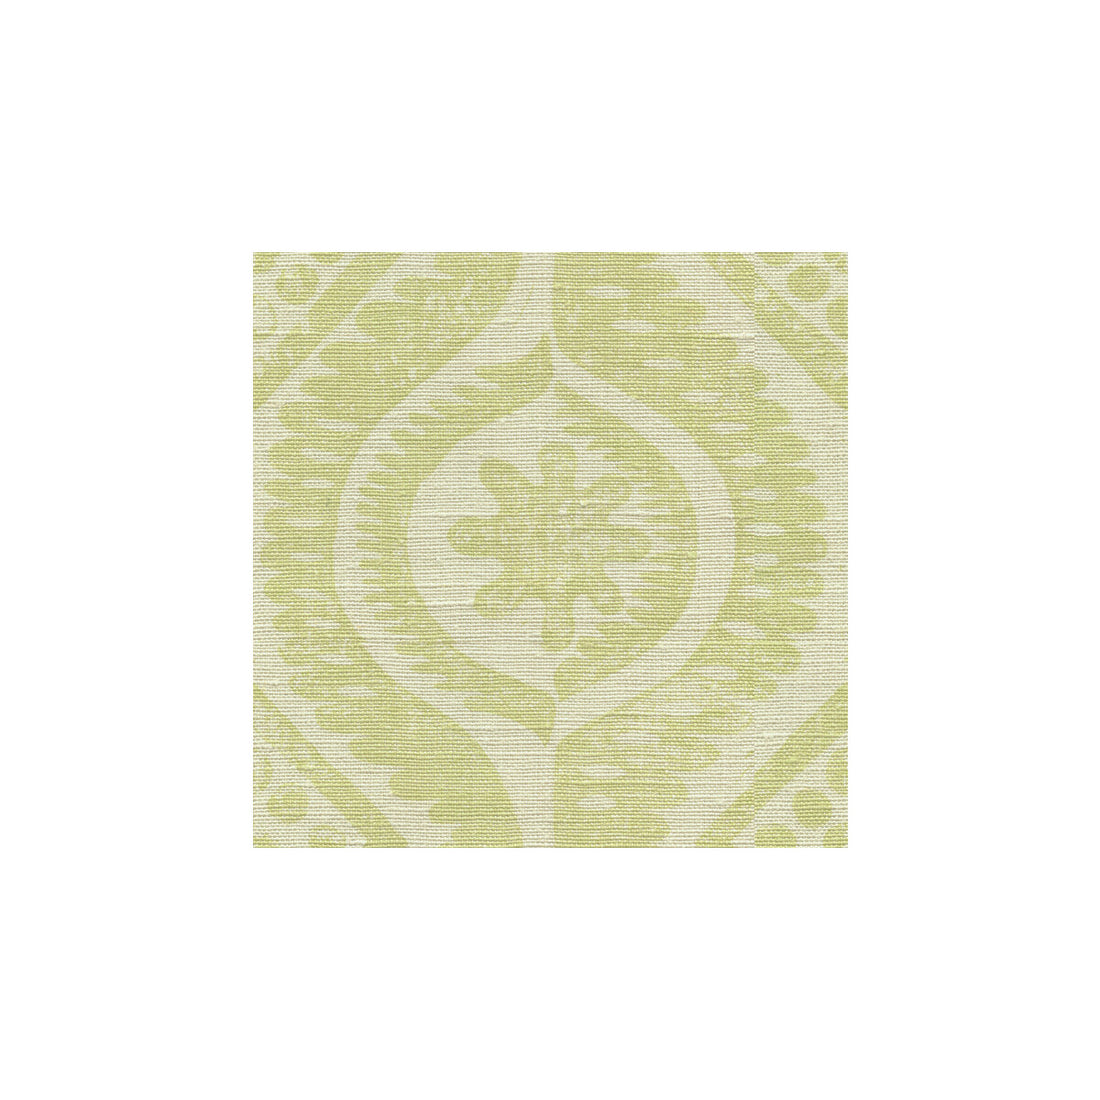 Damask fabric in lime color - pattern BFC-3518.23.0 - by Lee Jofa in the Blithfield collection